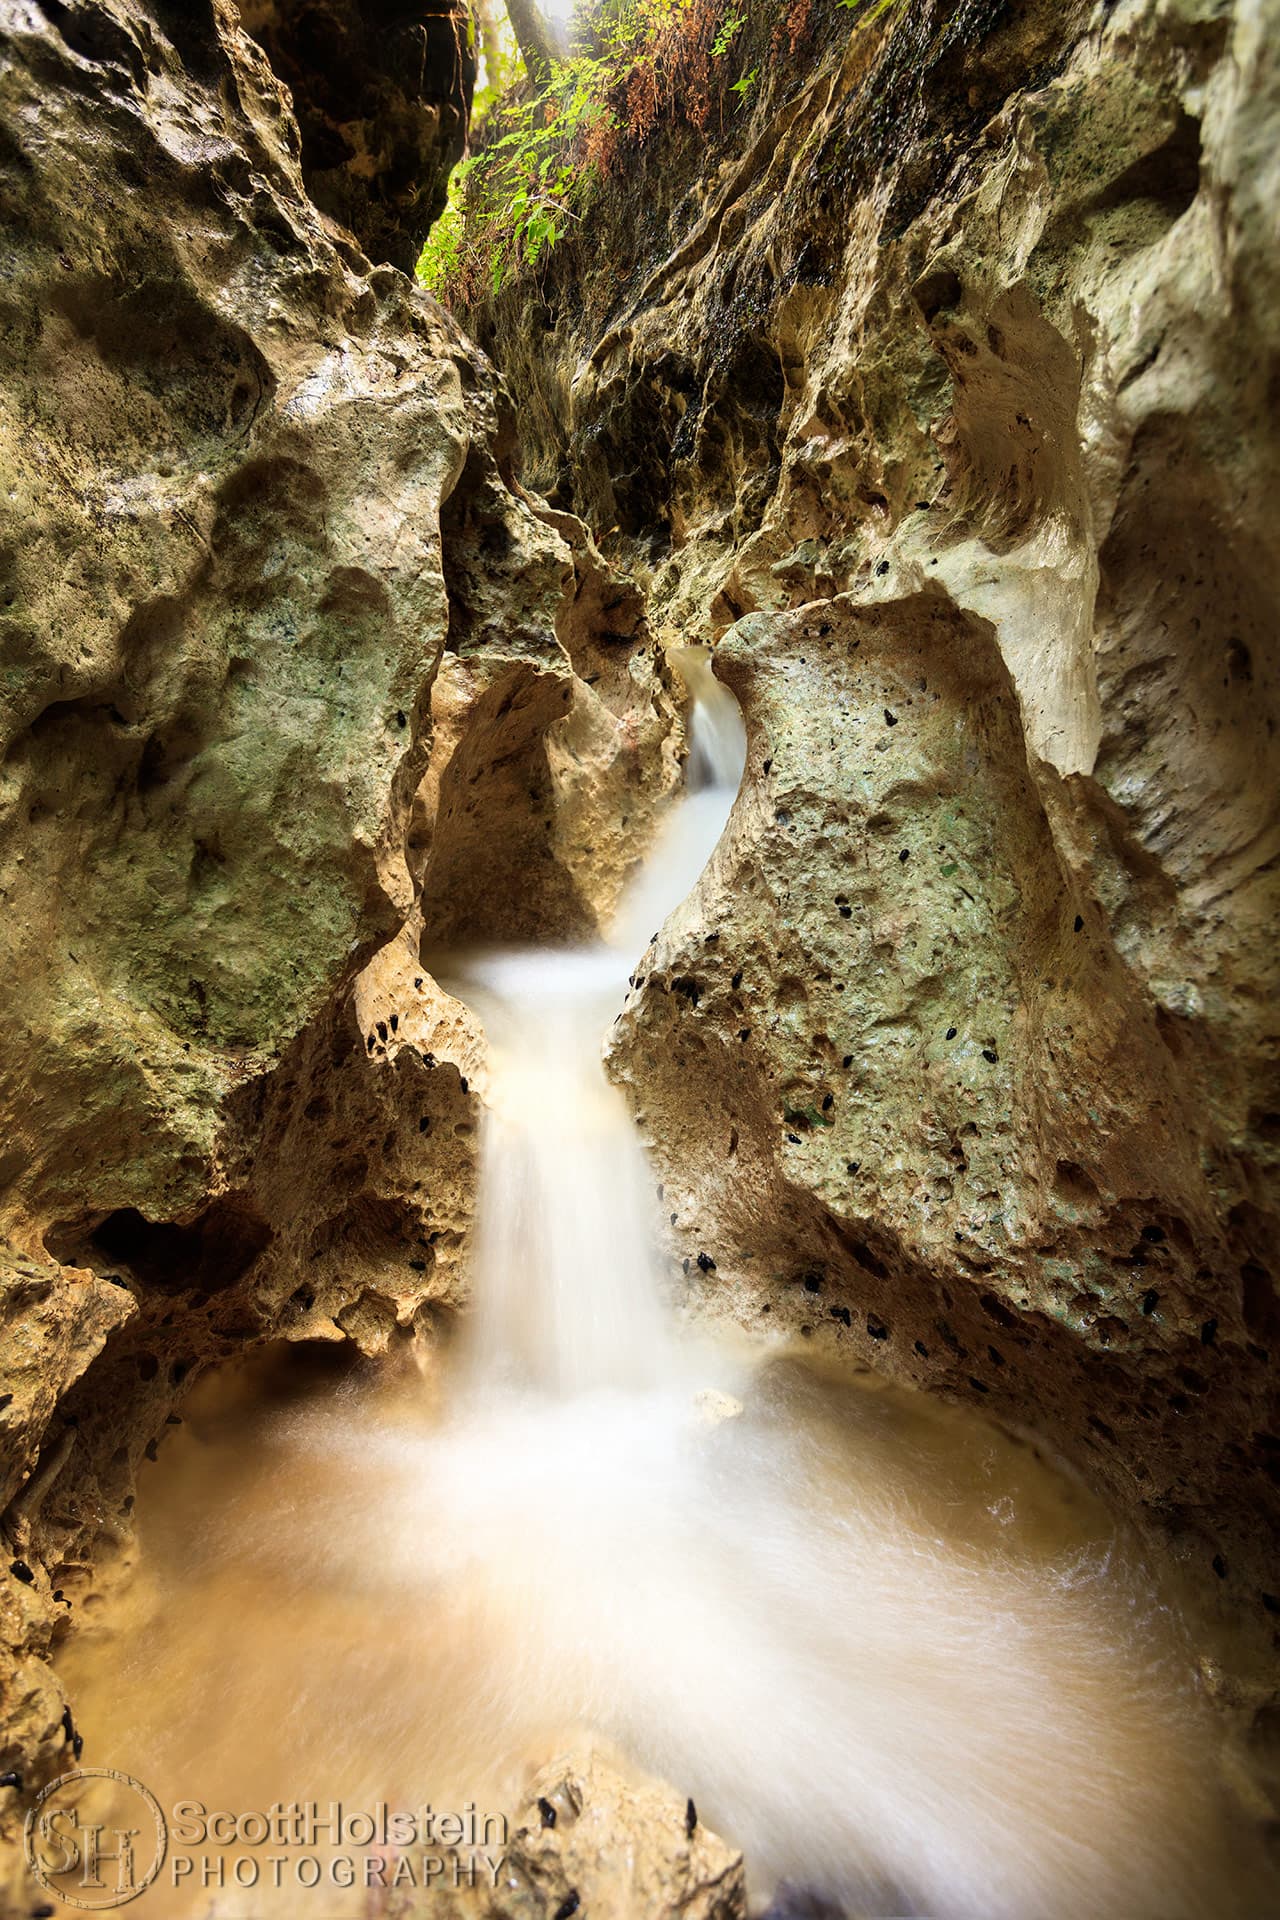 Florida Slot Canyon 1 landscape prints for sale: Water from a small creek cascades over limestone at the bottom of a narrow slot canyon.